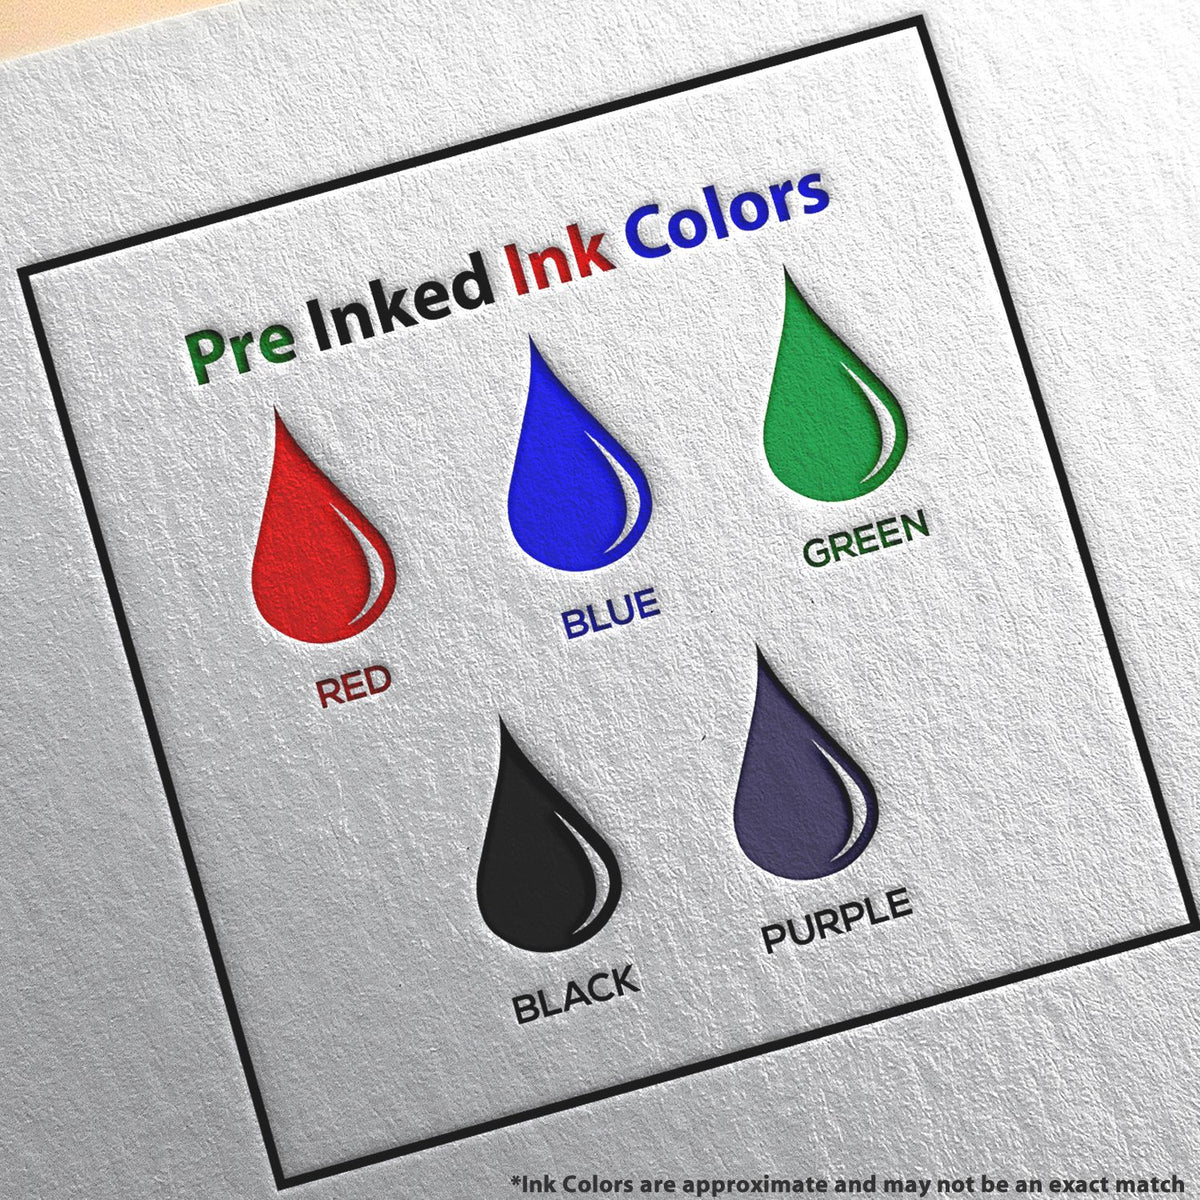 A picture showing the different ink colors or hues available for the MaxLight Premium Pre-Inked Ohio State Seal Notarial Stamp product.